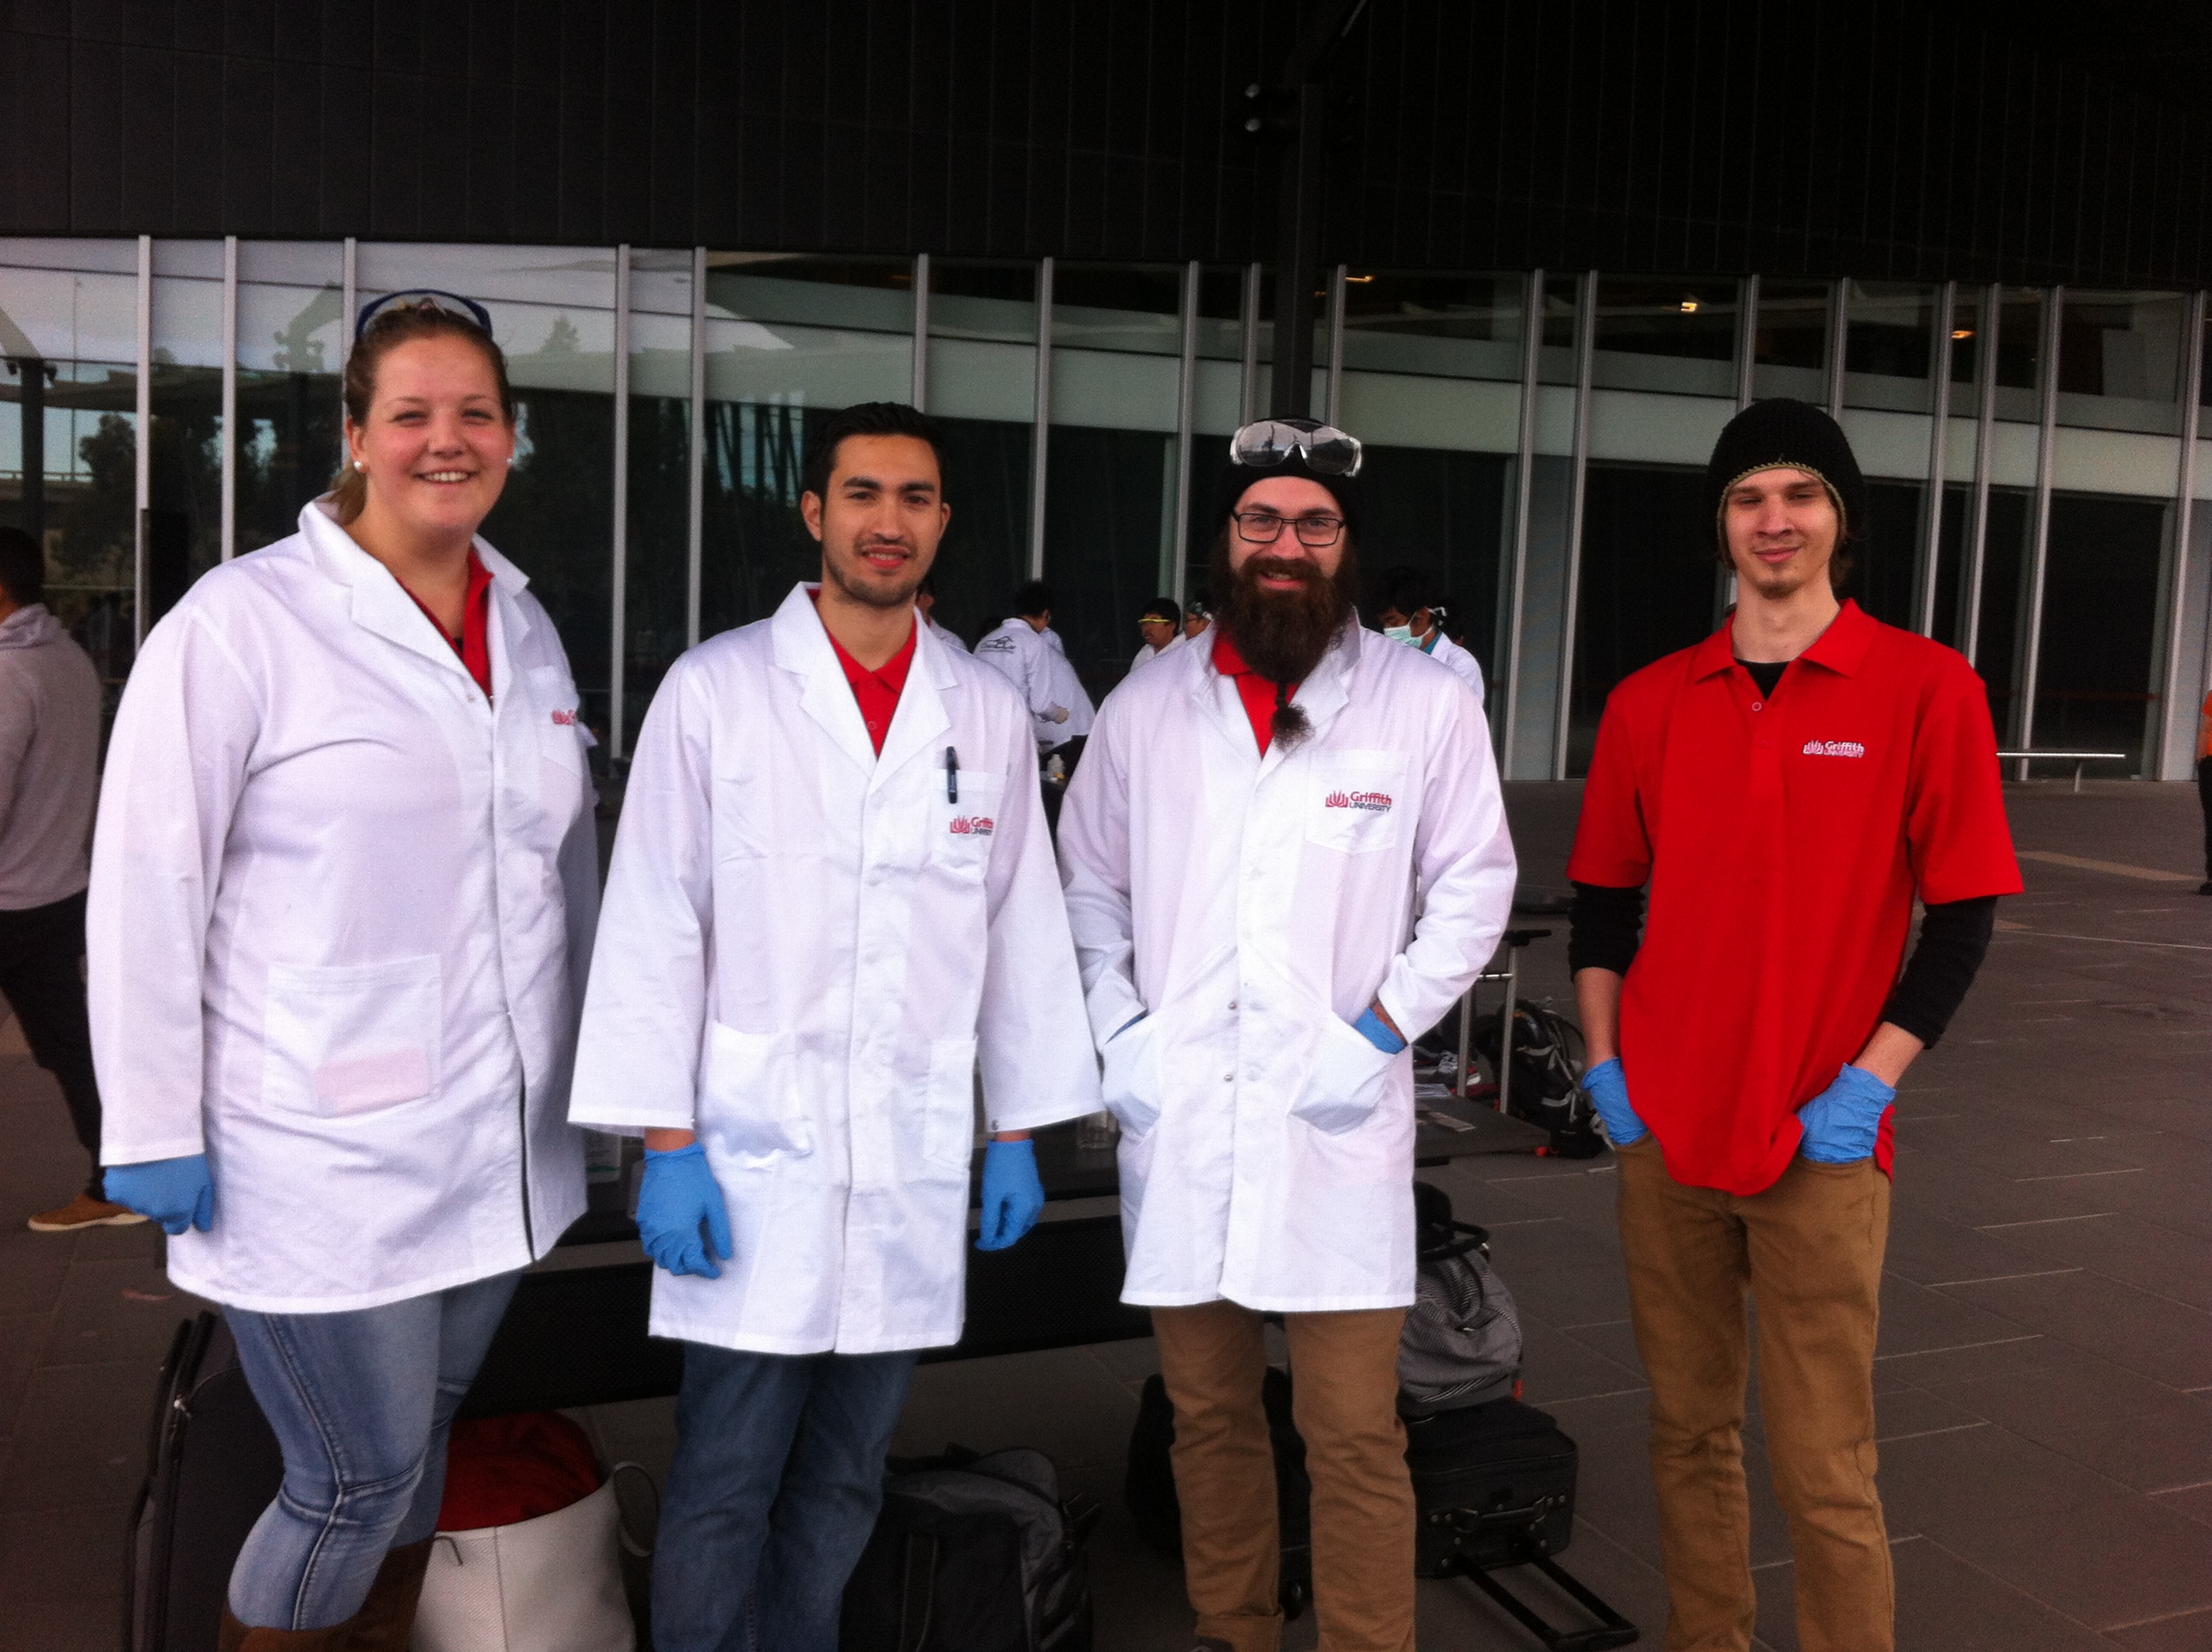 Engineering students, from left, Claudia Smith, Robin Klein, Matthew Watson and Will Stockdale at the Chem-E-Car competition in Melbourne